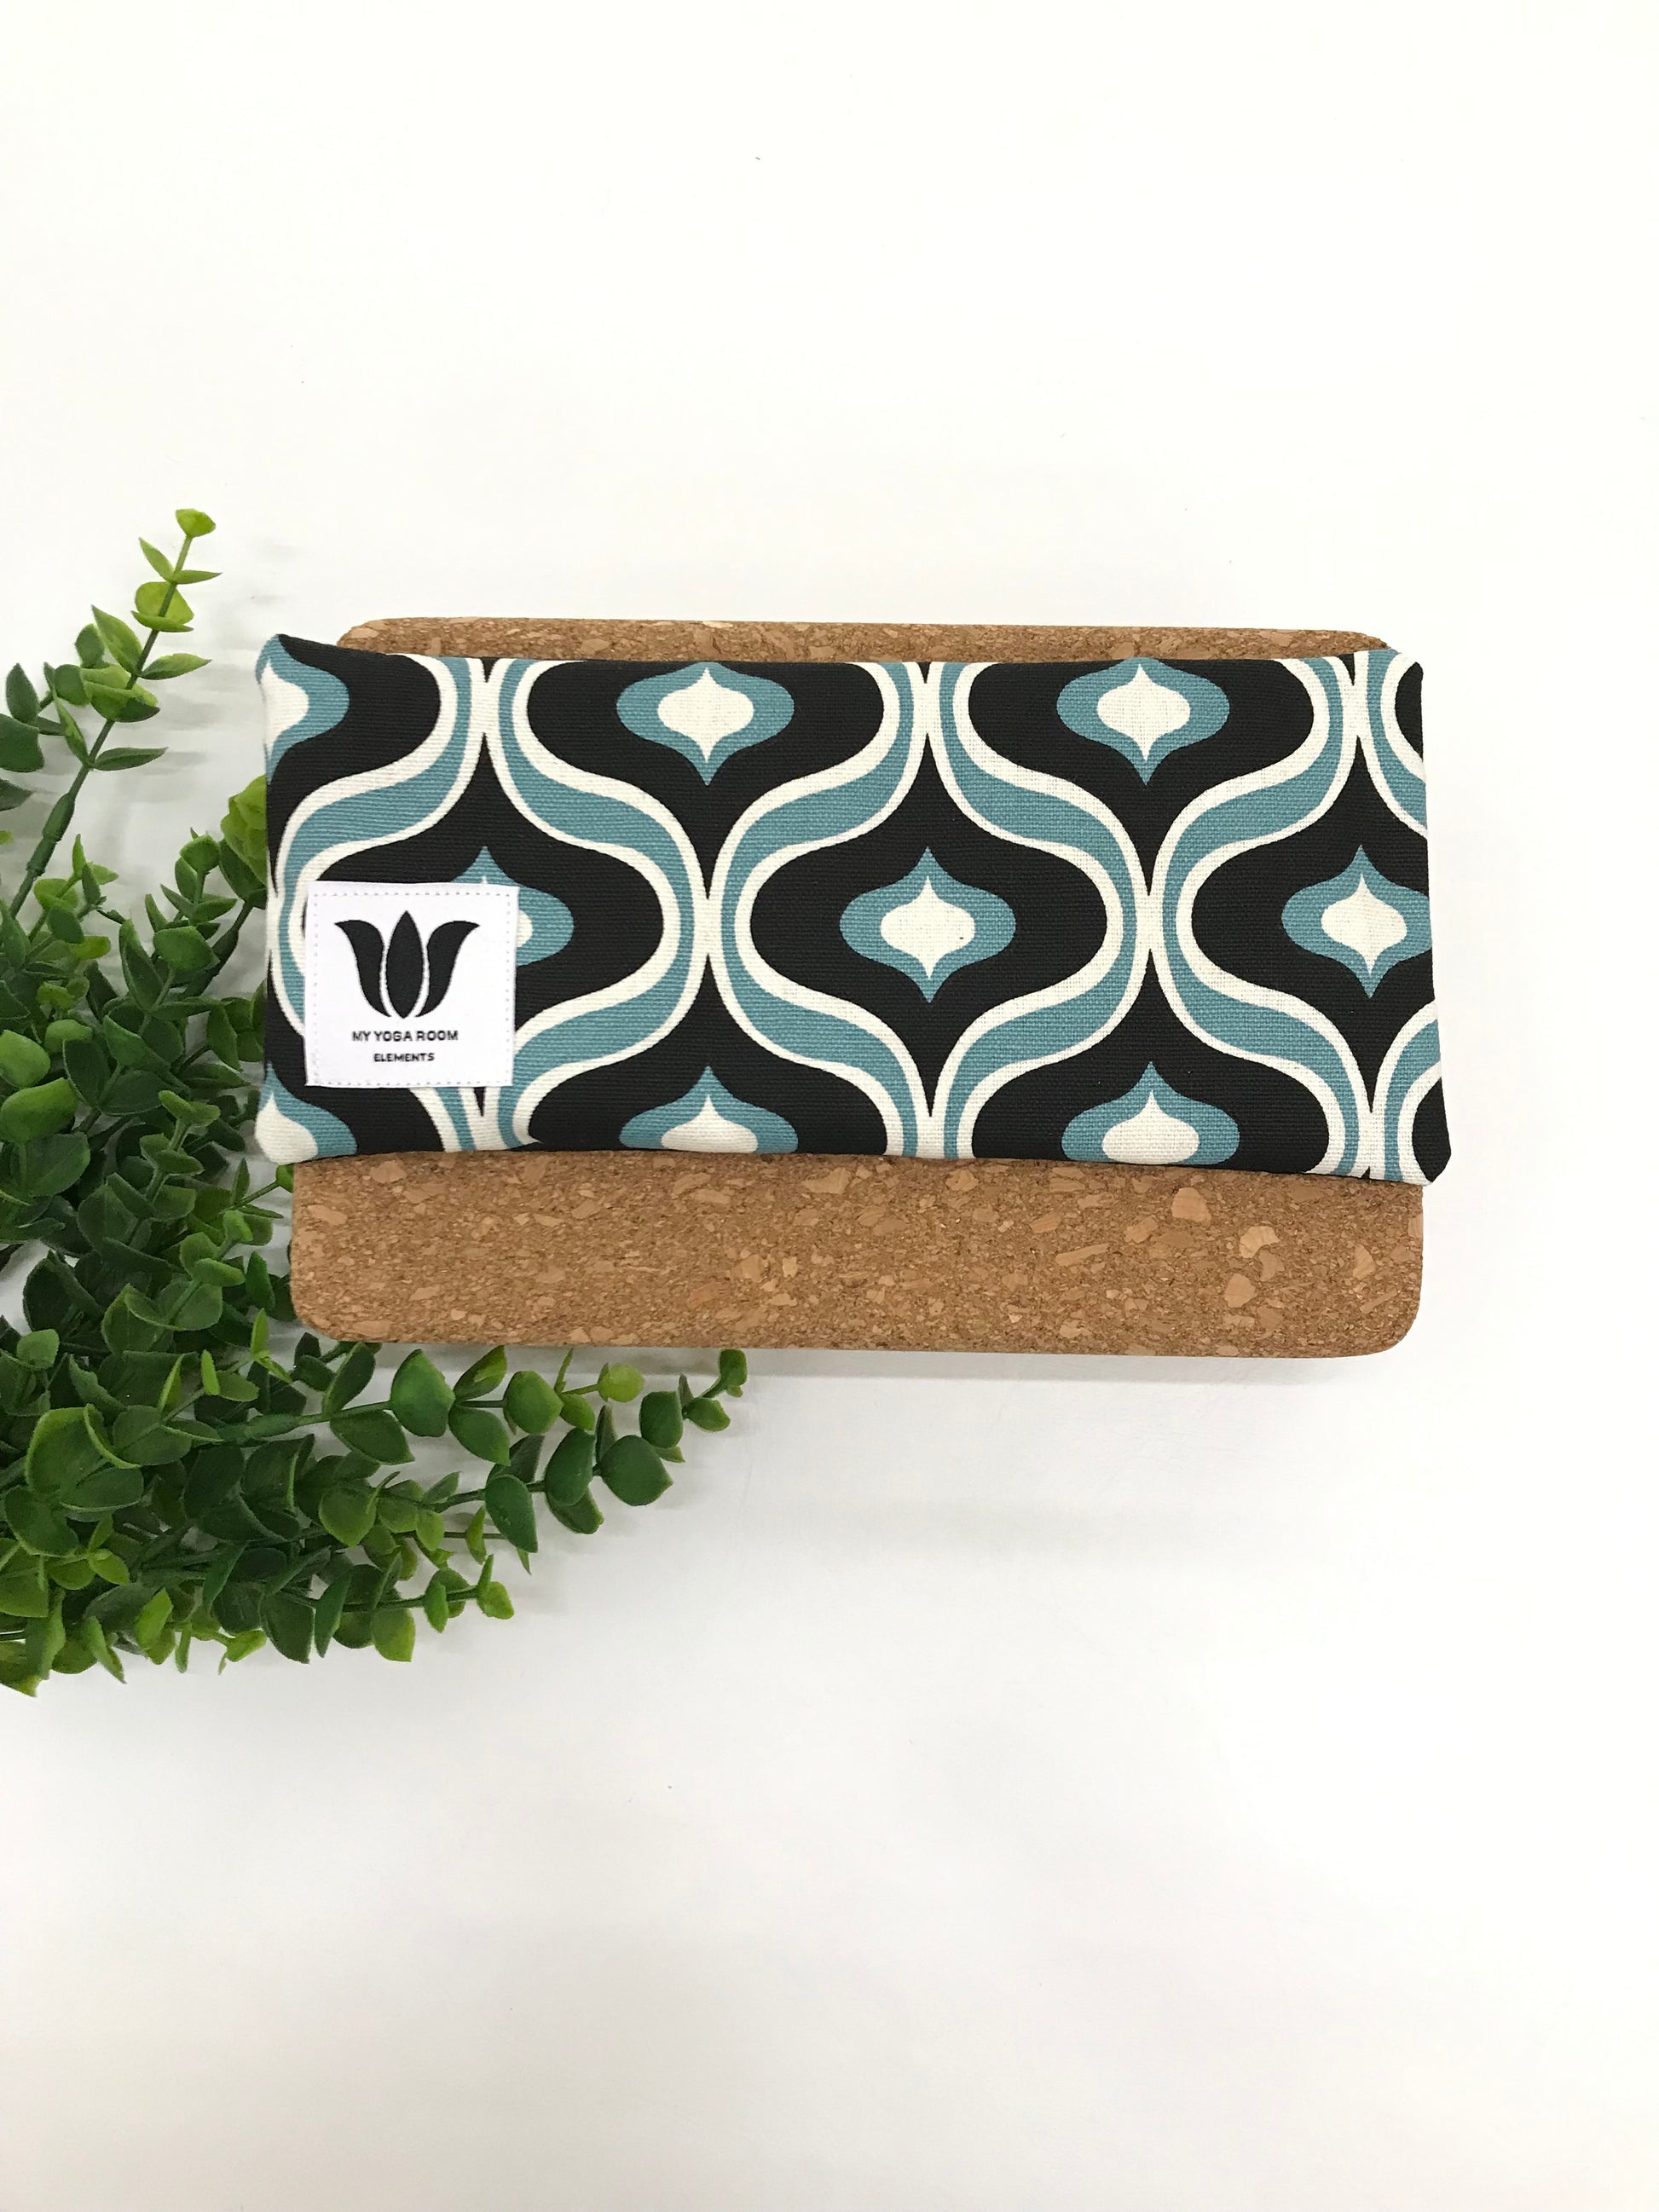 Yoga eye pillow, unscented, therapeutically weighted to soothe eye strain and stress or enhance your savasana. Handcrafted in Canada by My Yoga Room Elements. Black and turquoise mcm print and bamboo fabric.